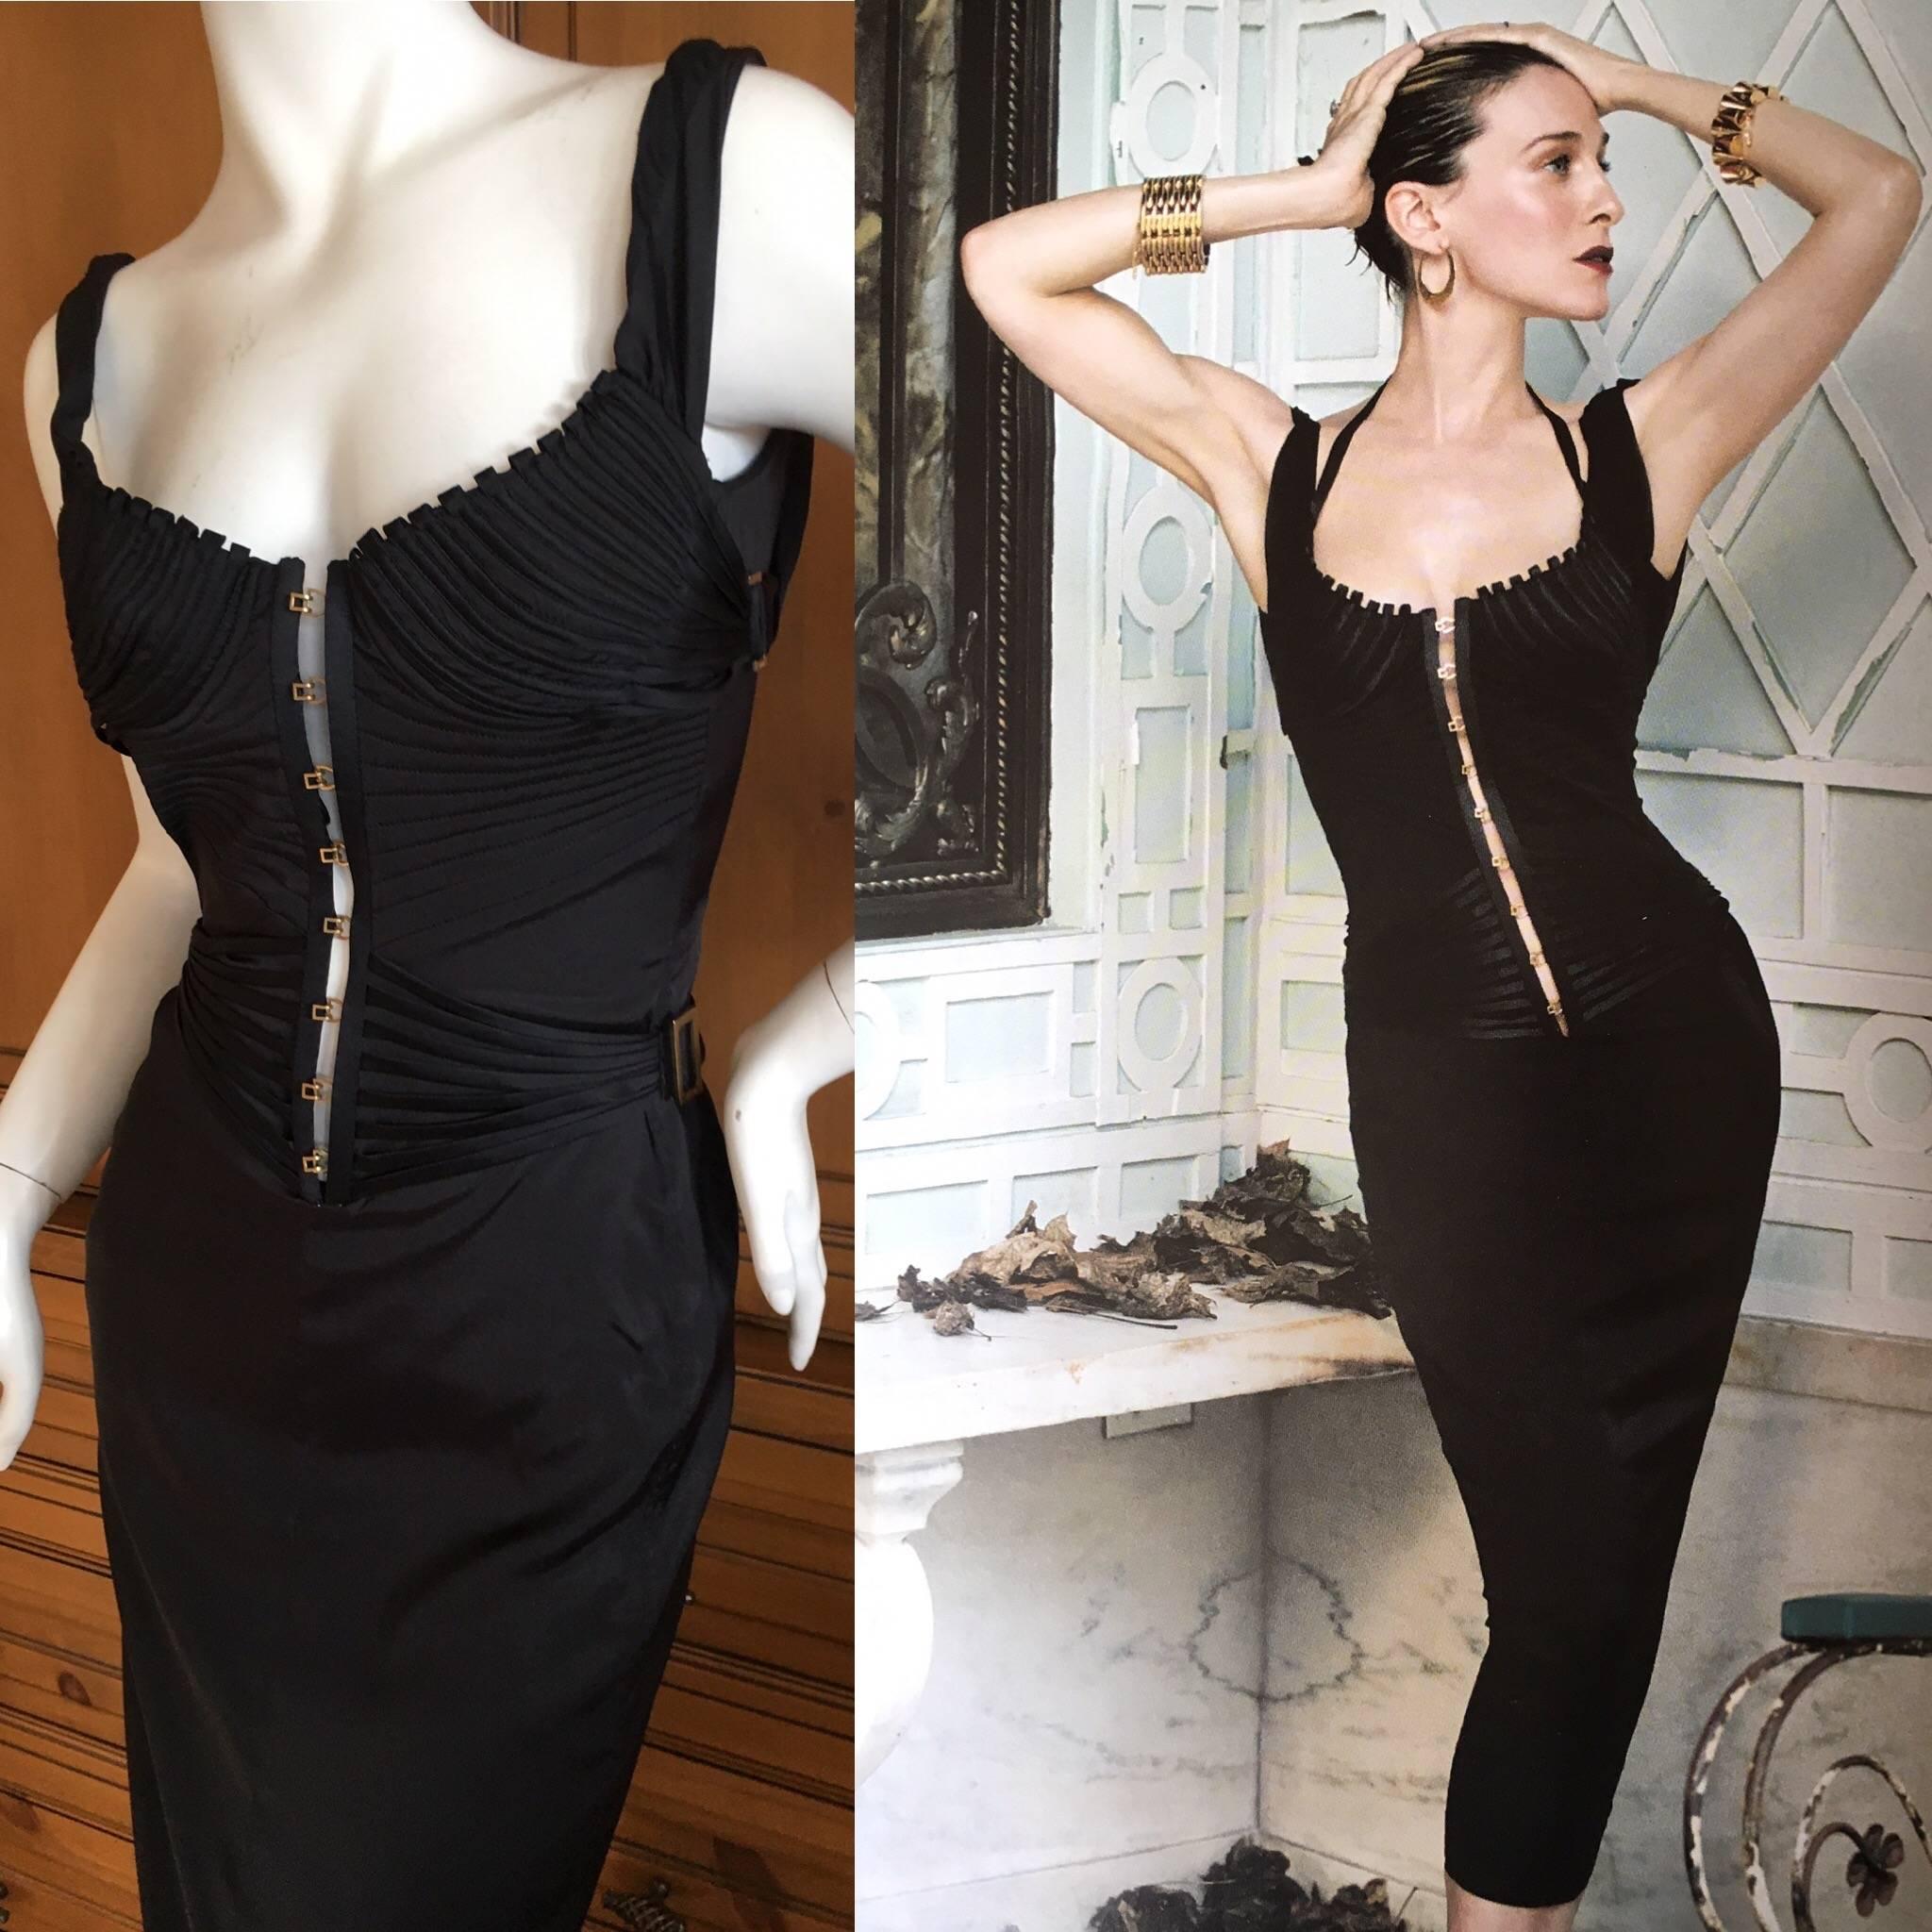 Gucci by Tom Ford Black Corset Dress Tom Ford Book Dress on SJP 3